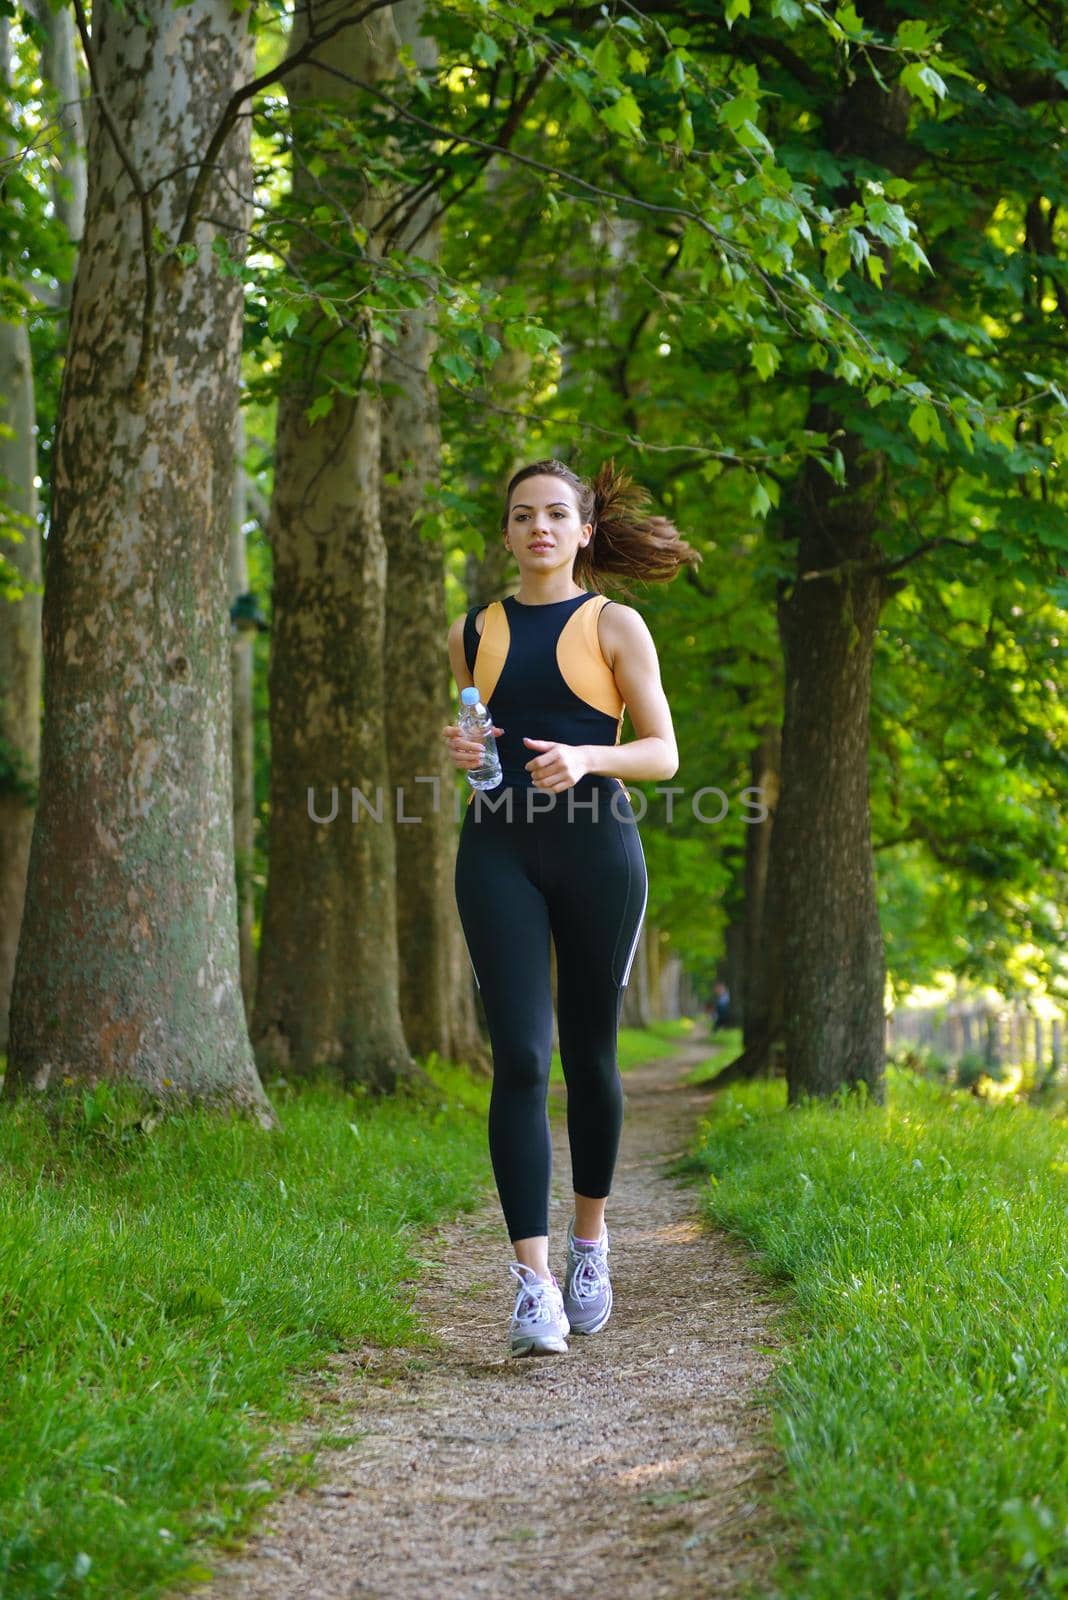 Young beautiful  woman jogging in summer park. Woman in sport outdoors health concept